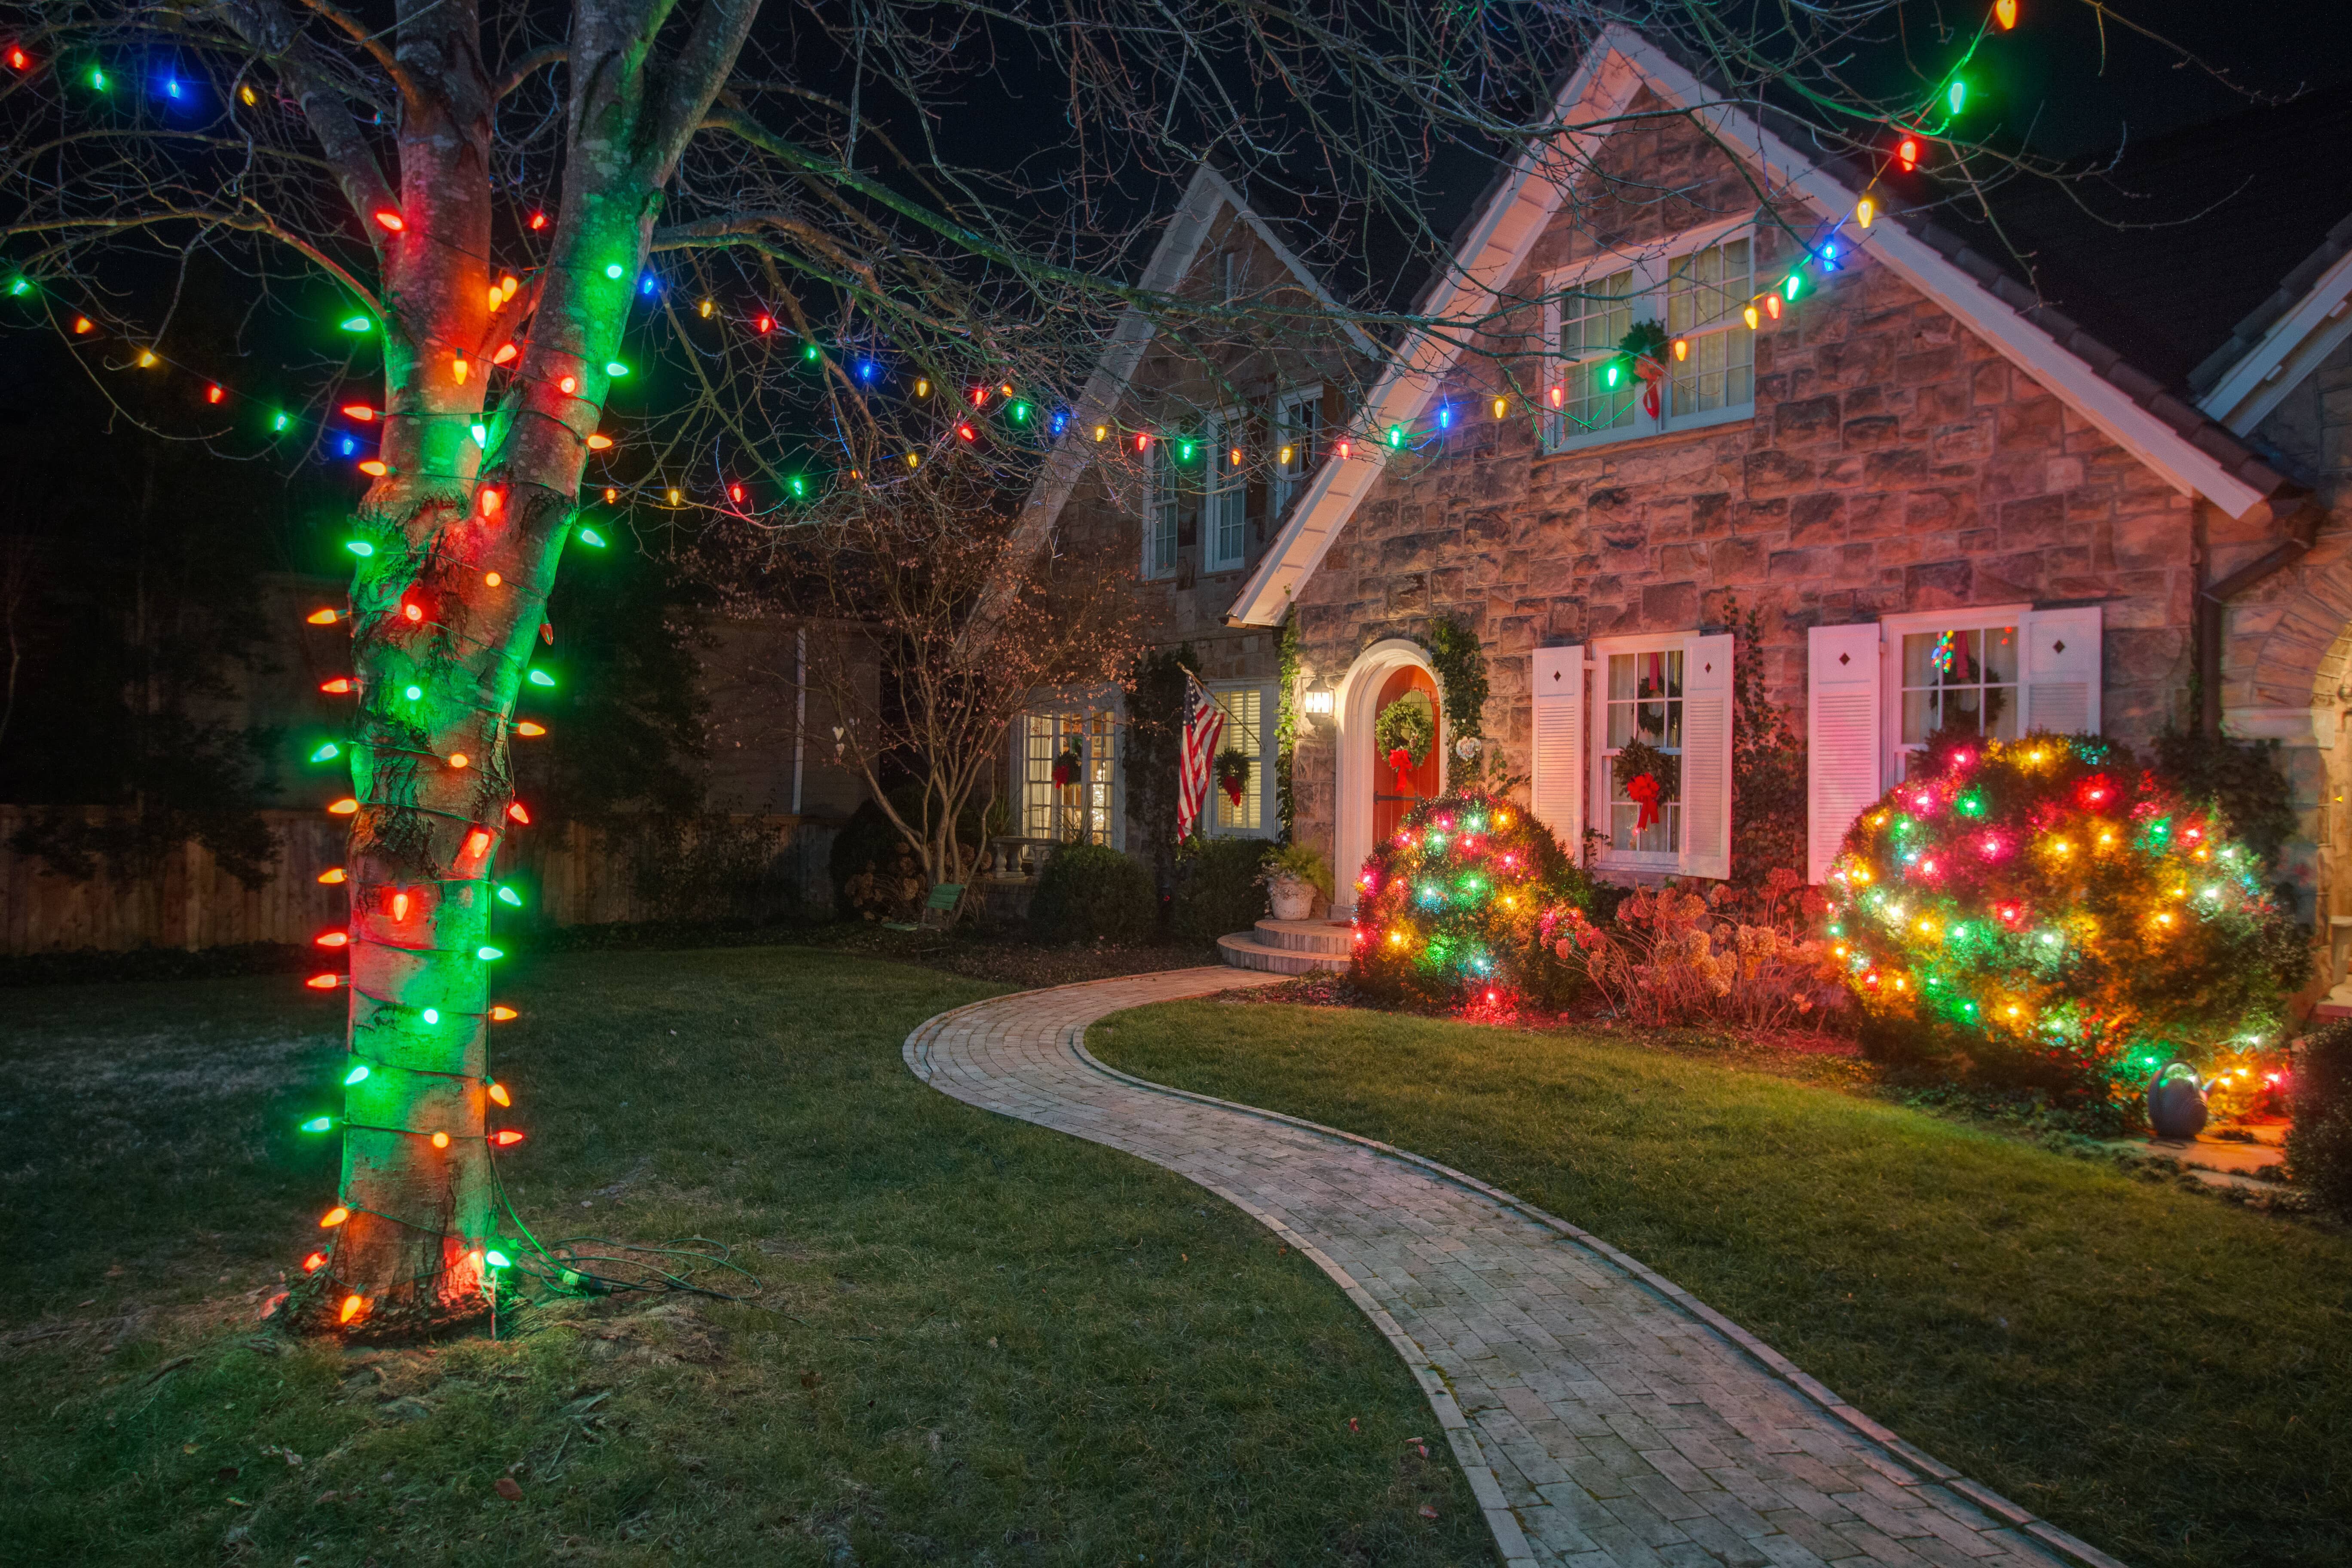 House with exterior holiday lighting